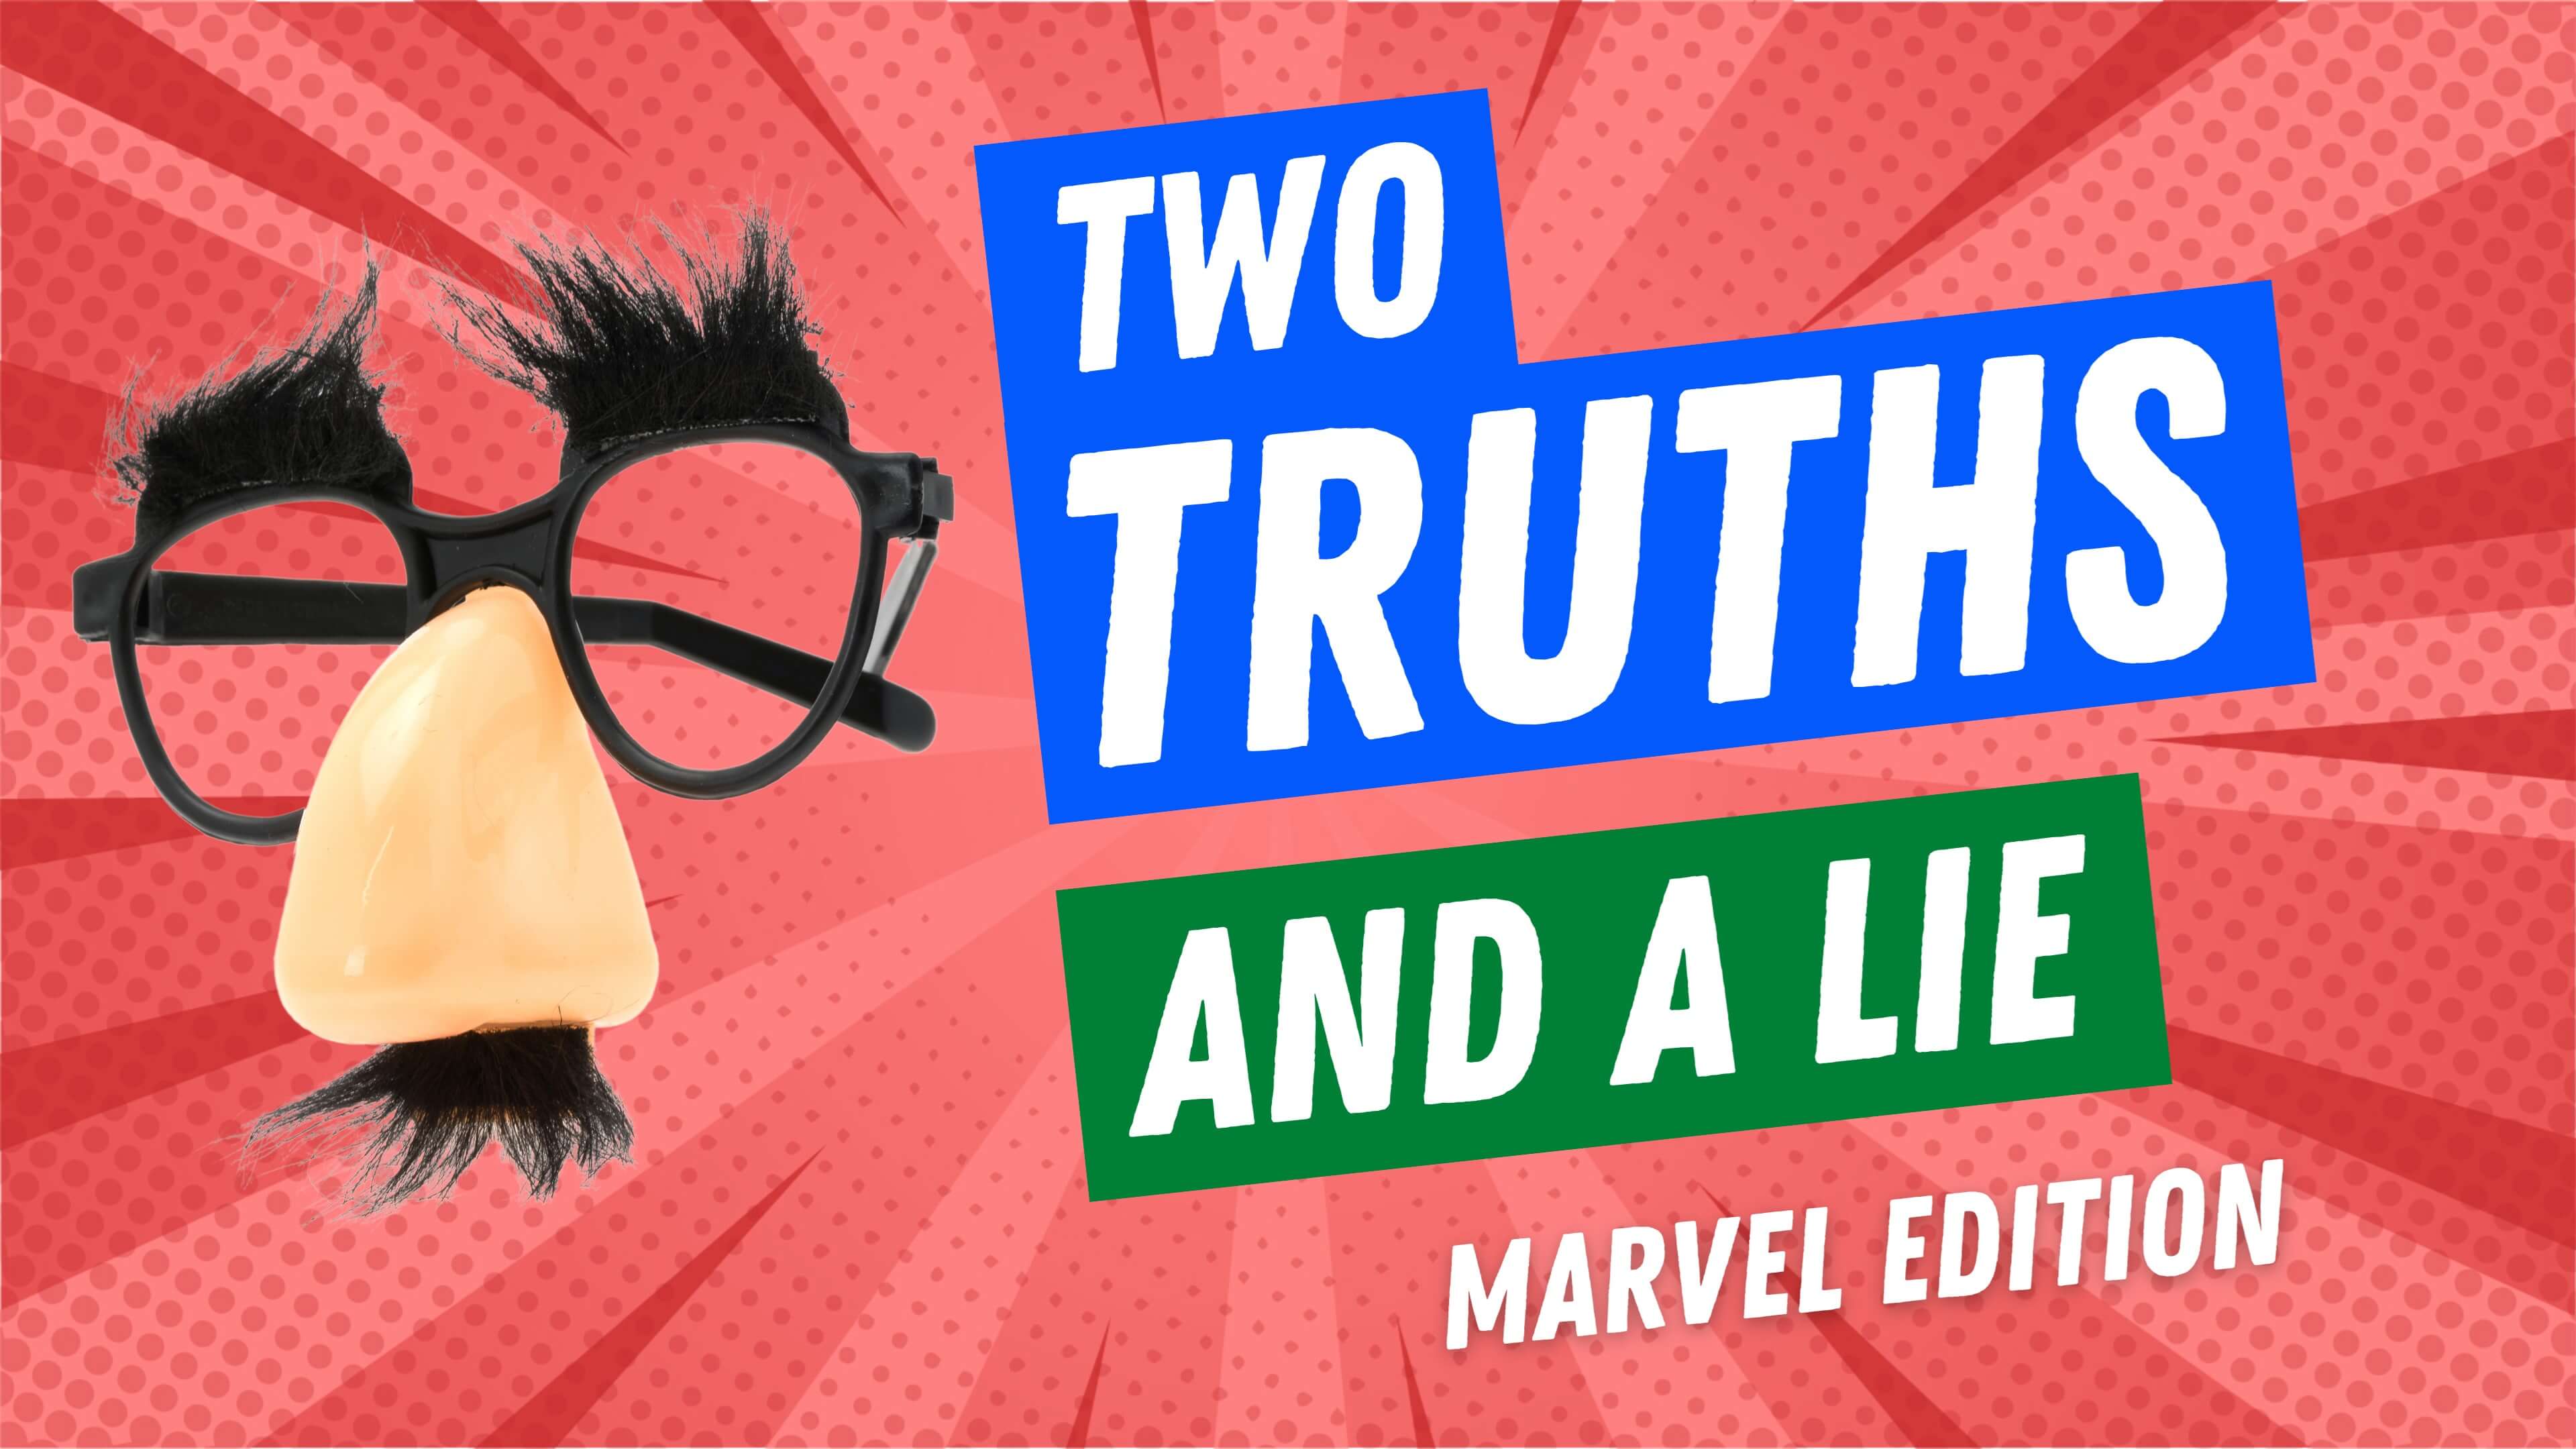 Two Truths And A Lie: Marvel Edition